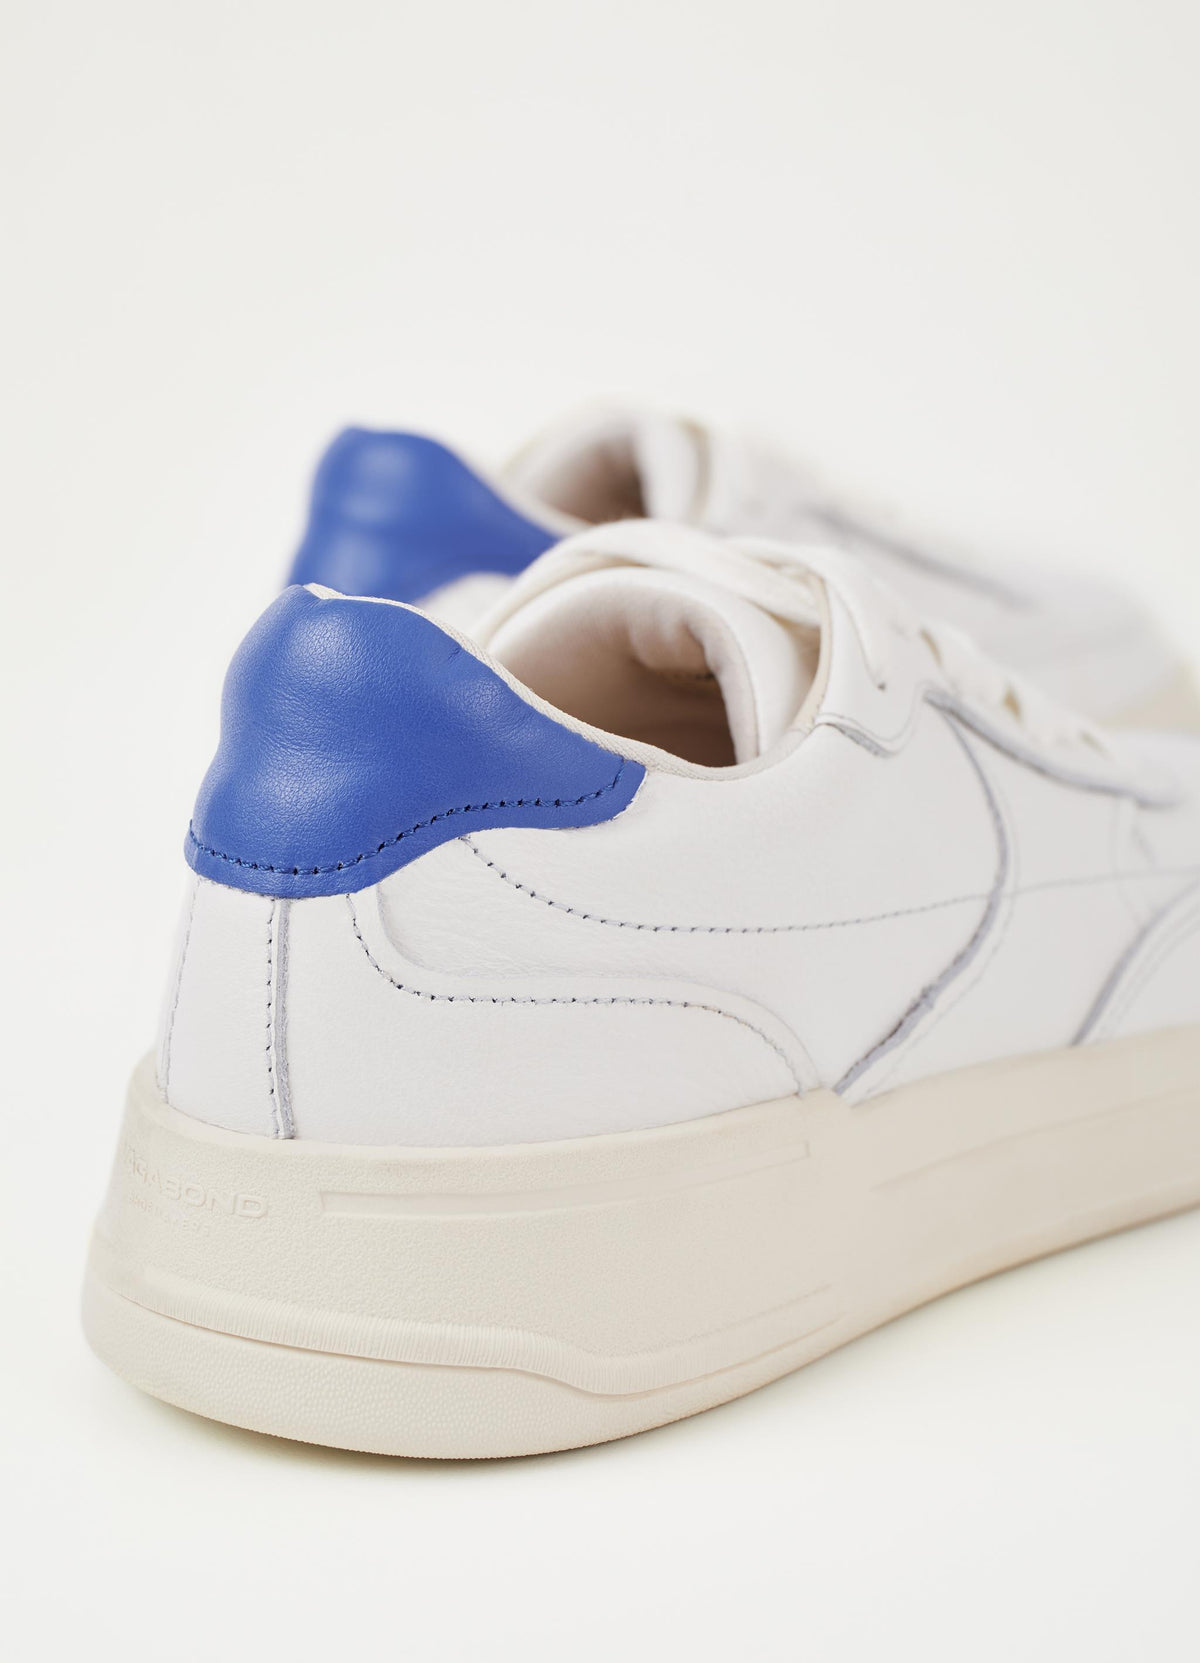 White trainer with cobalt blue heel and white laces